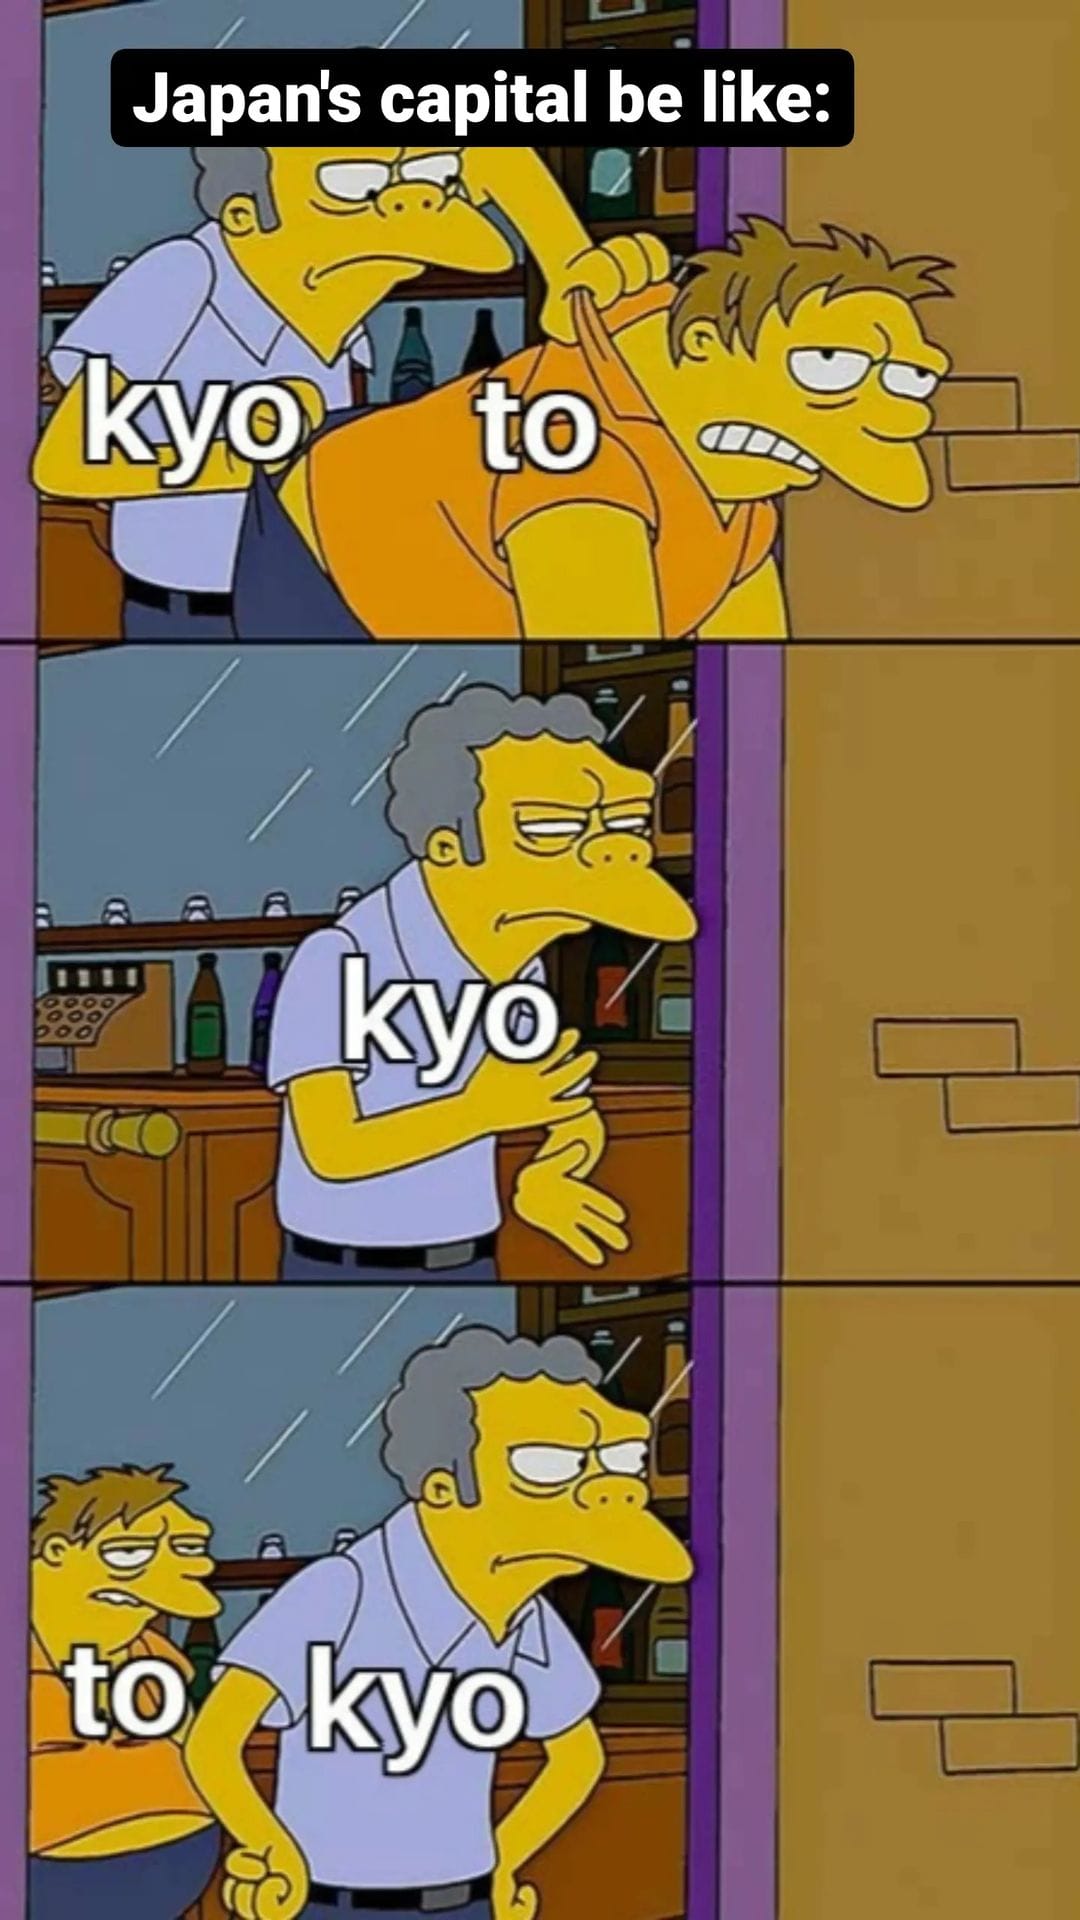 hilarious memes - all tomorrow's meme - Japan's capital be kyo to kyo to kyo